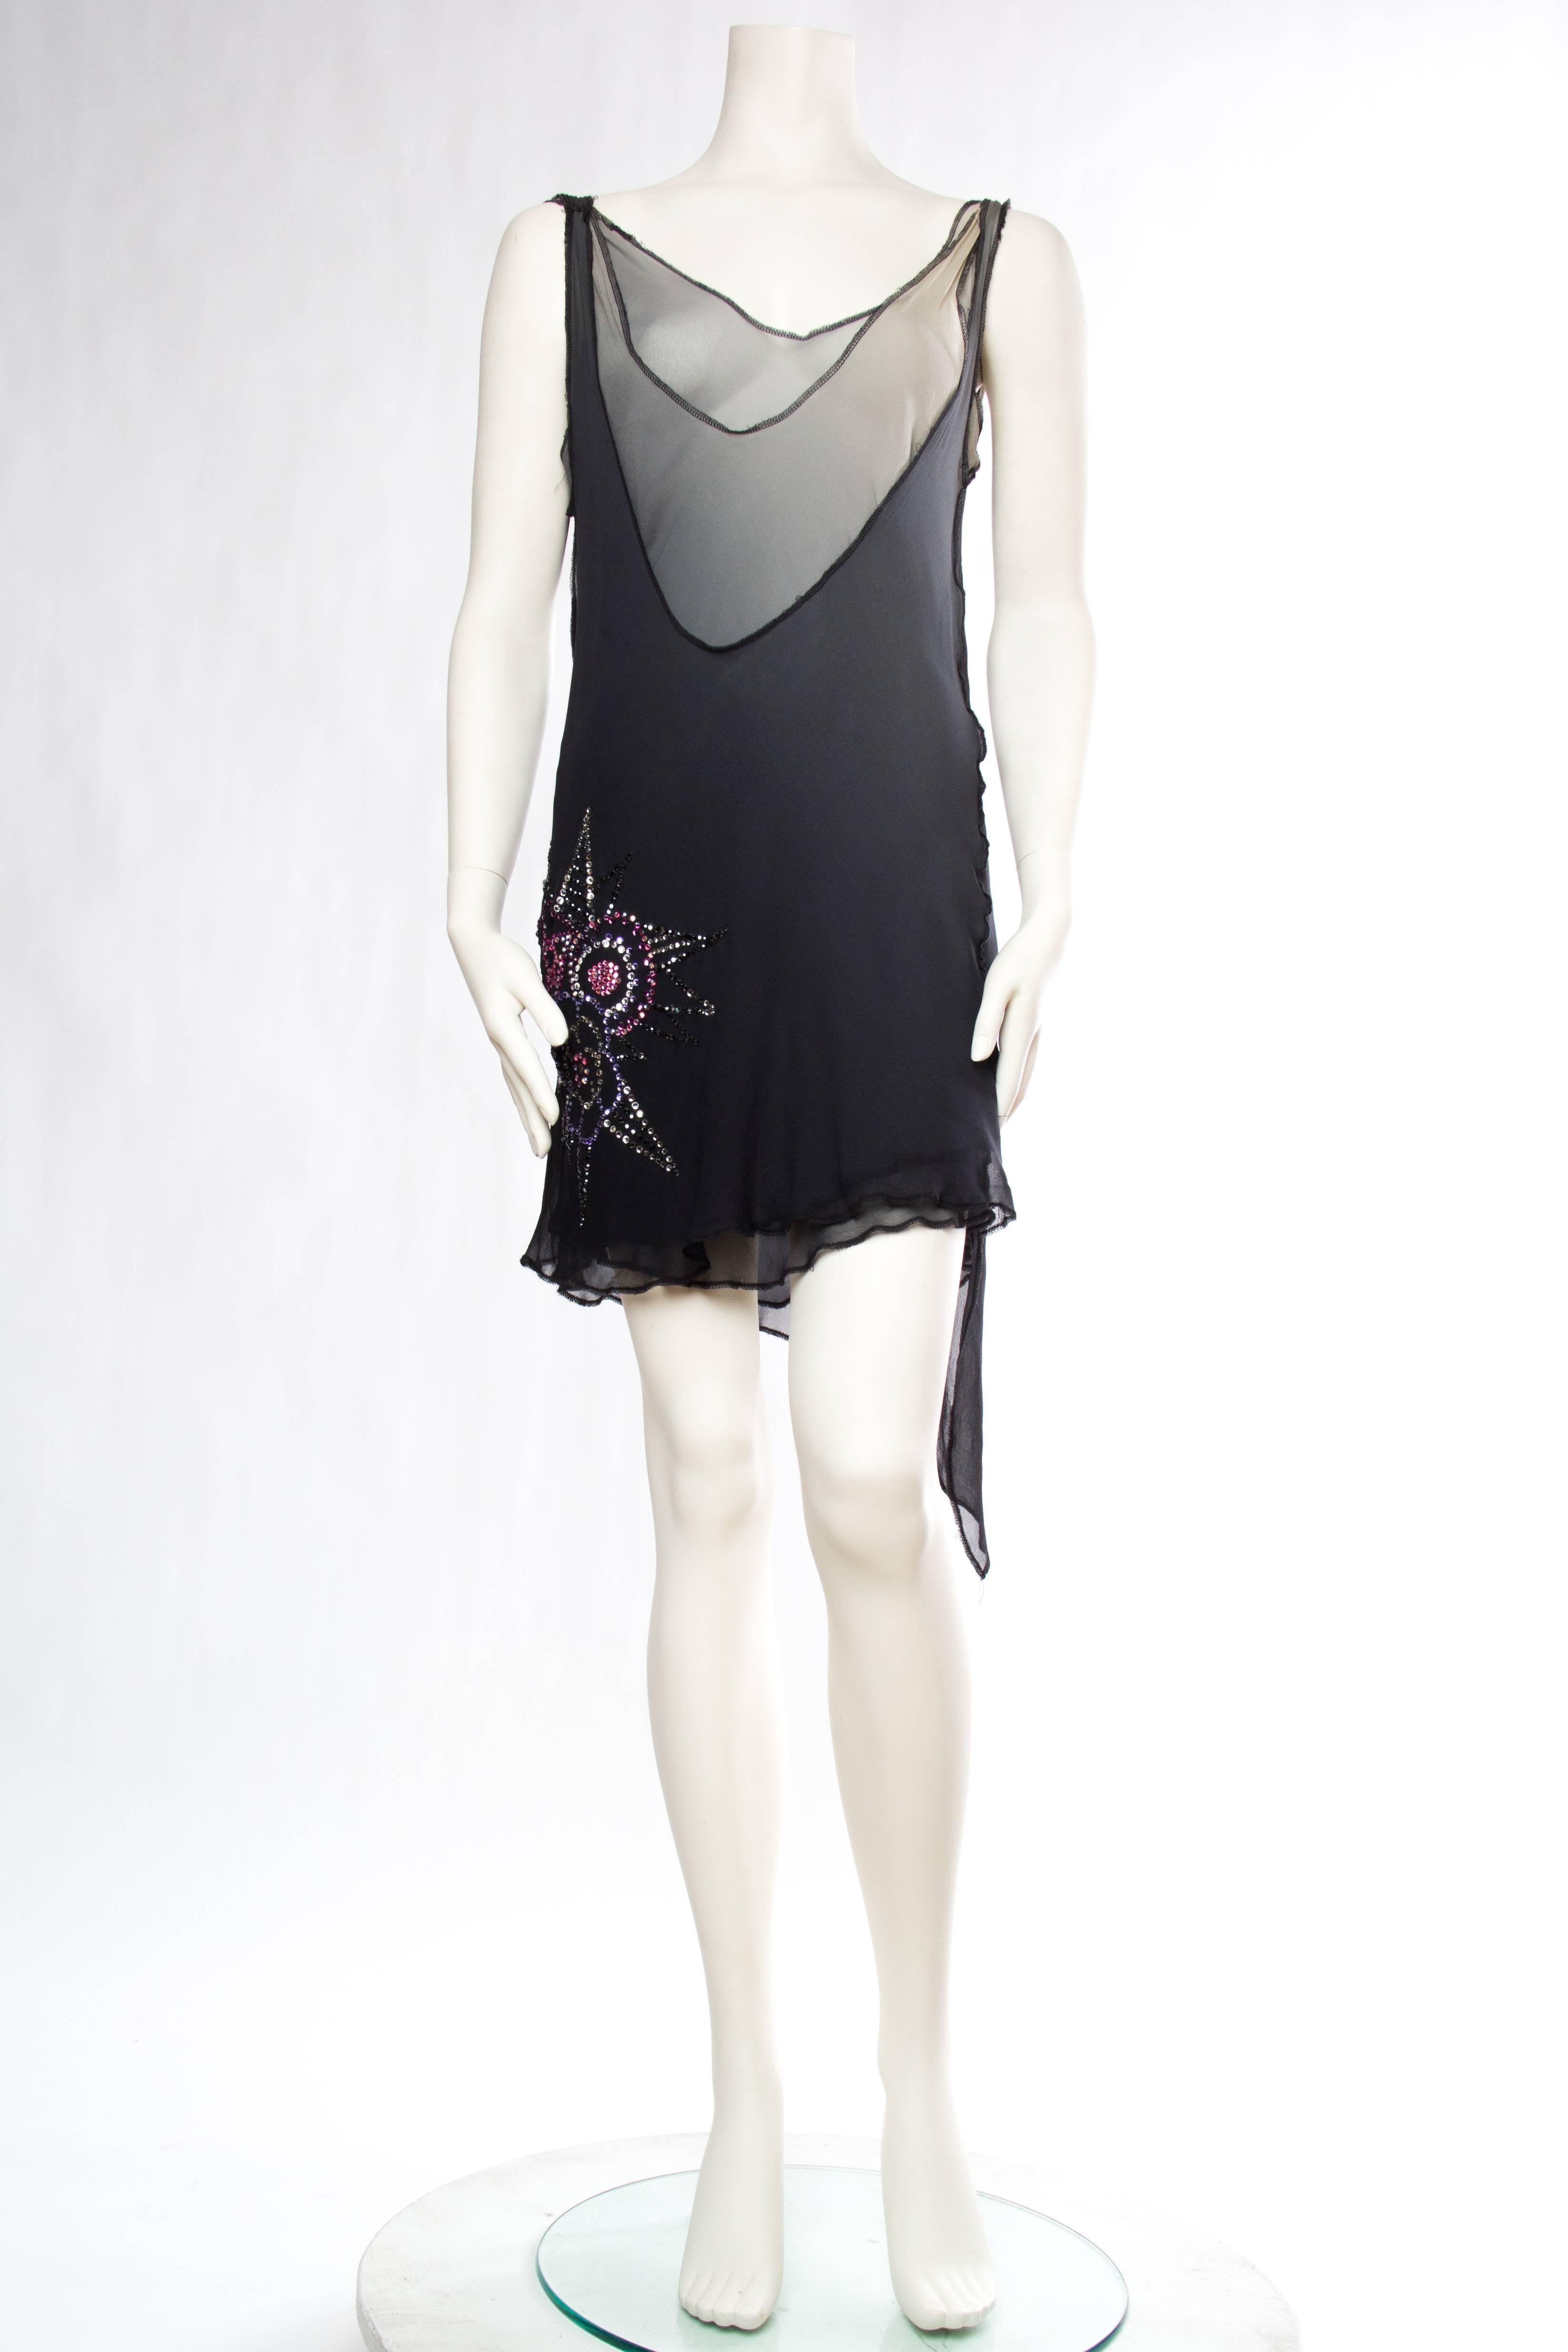 MORPHEW COLLECTION Grey Ombré Silk Chiffon Deconstructed Bias Flapper Style Cocktail Dress With Swarovski Crystals